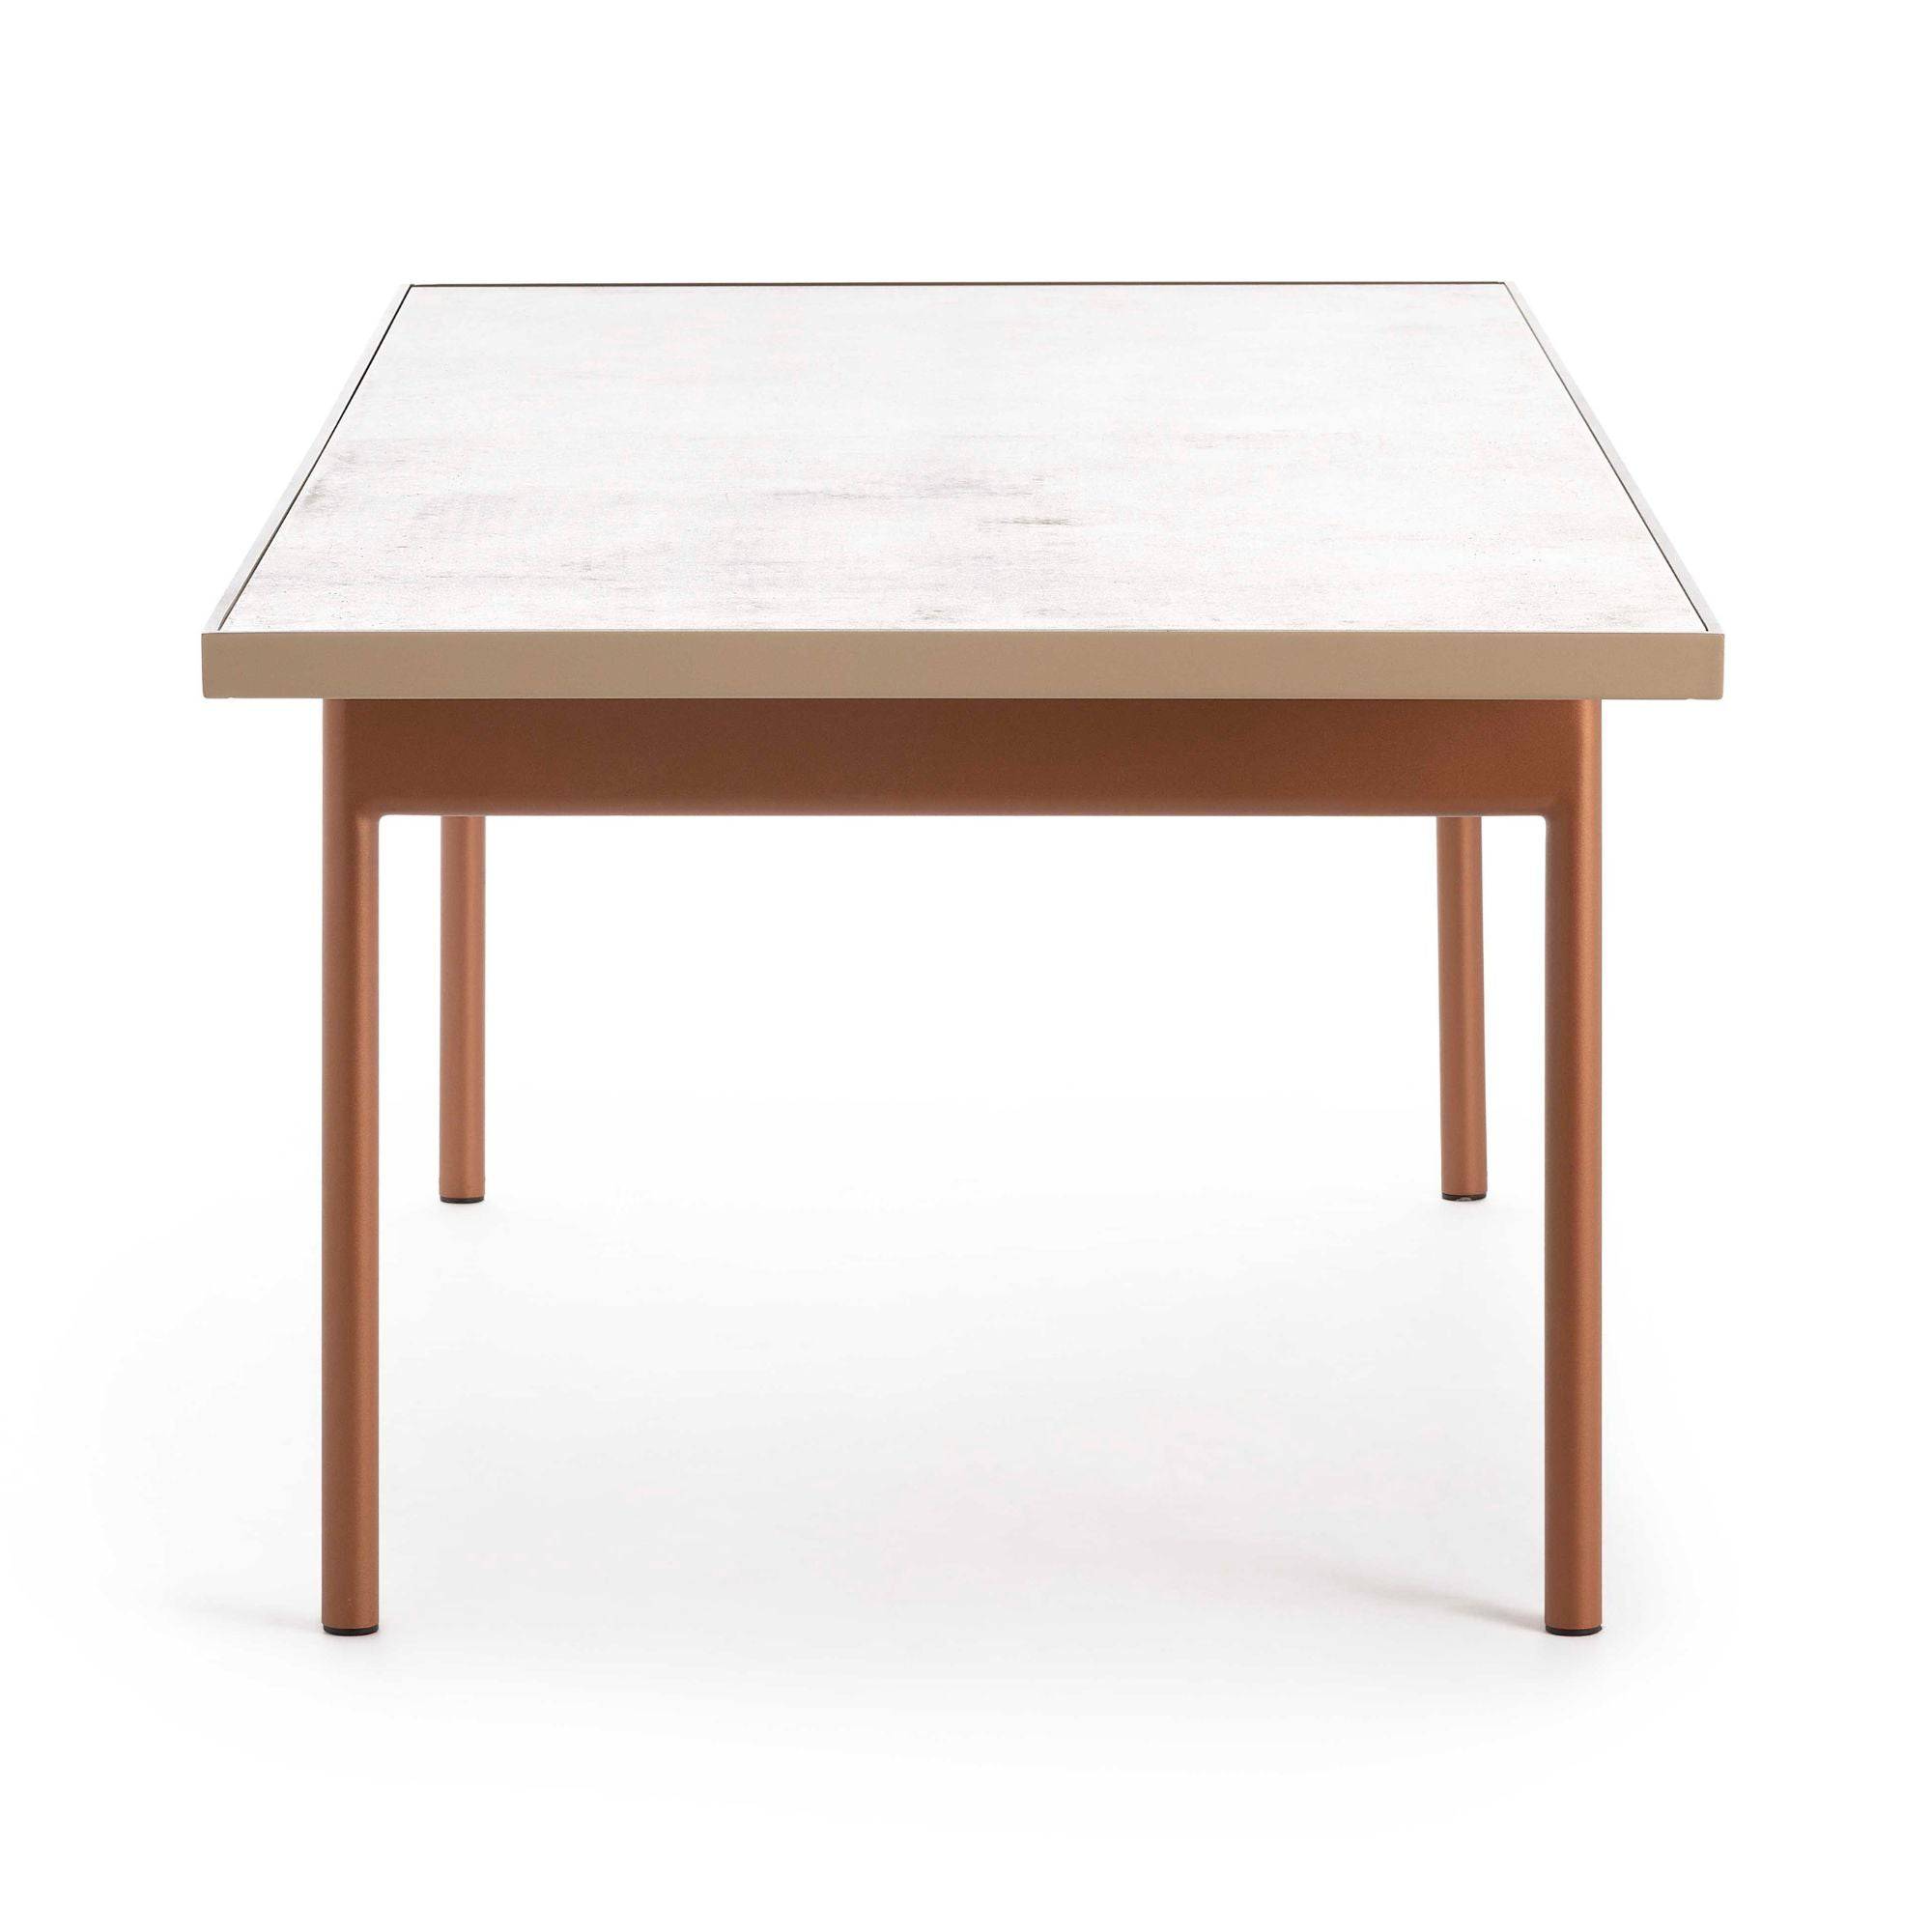 Onde Dining Table - THAT COOL LIVING